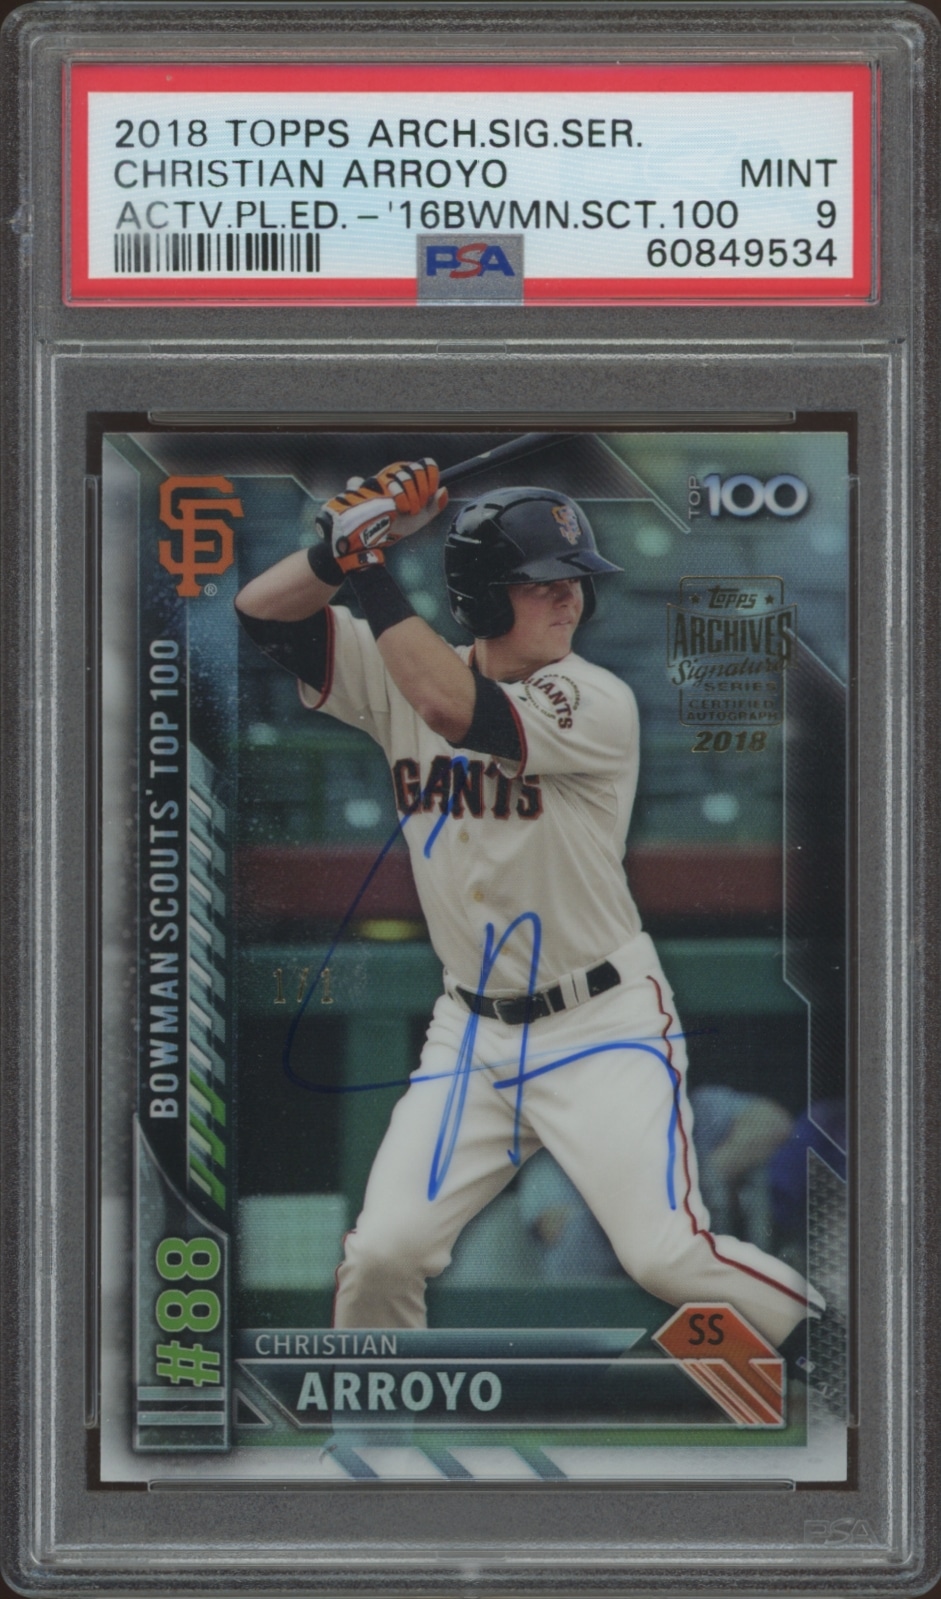 Christian Arroyos 2016 Bowman Scouts Top 100 signed card, graded MINT 9 by PSA.